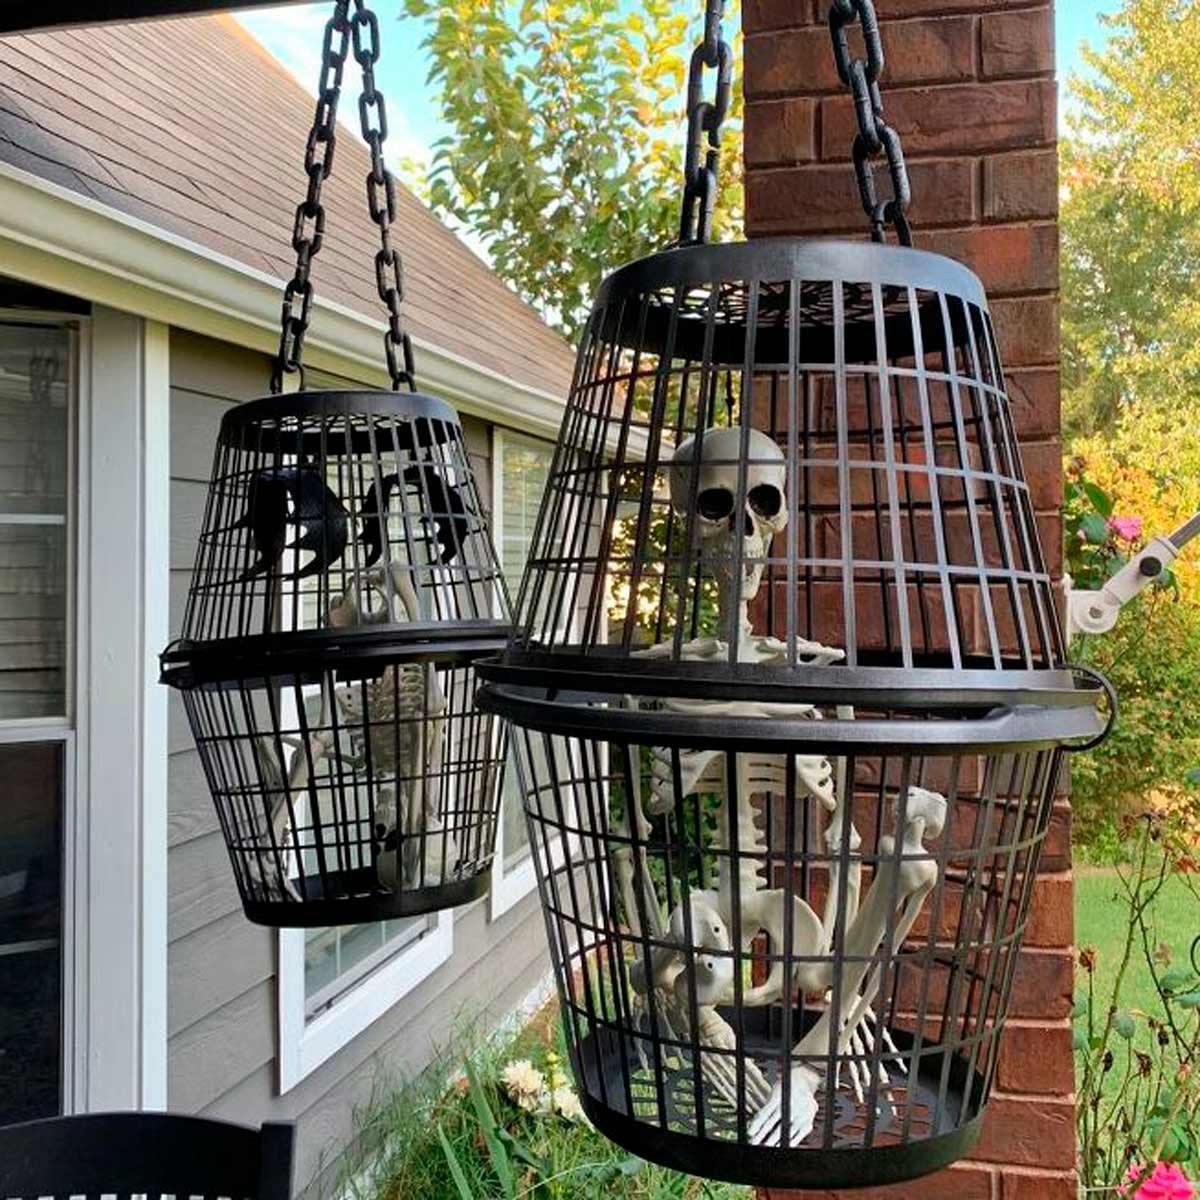 DIY Halloween Decor: Turn a Laundry Basket into a Spooky Cage